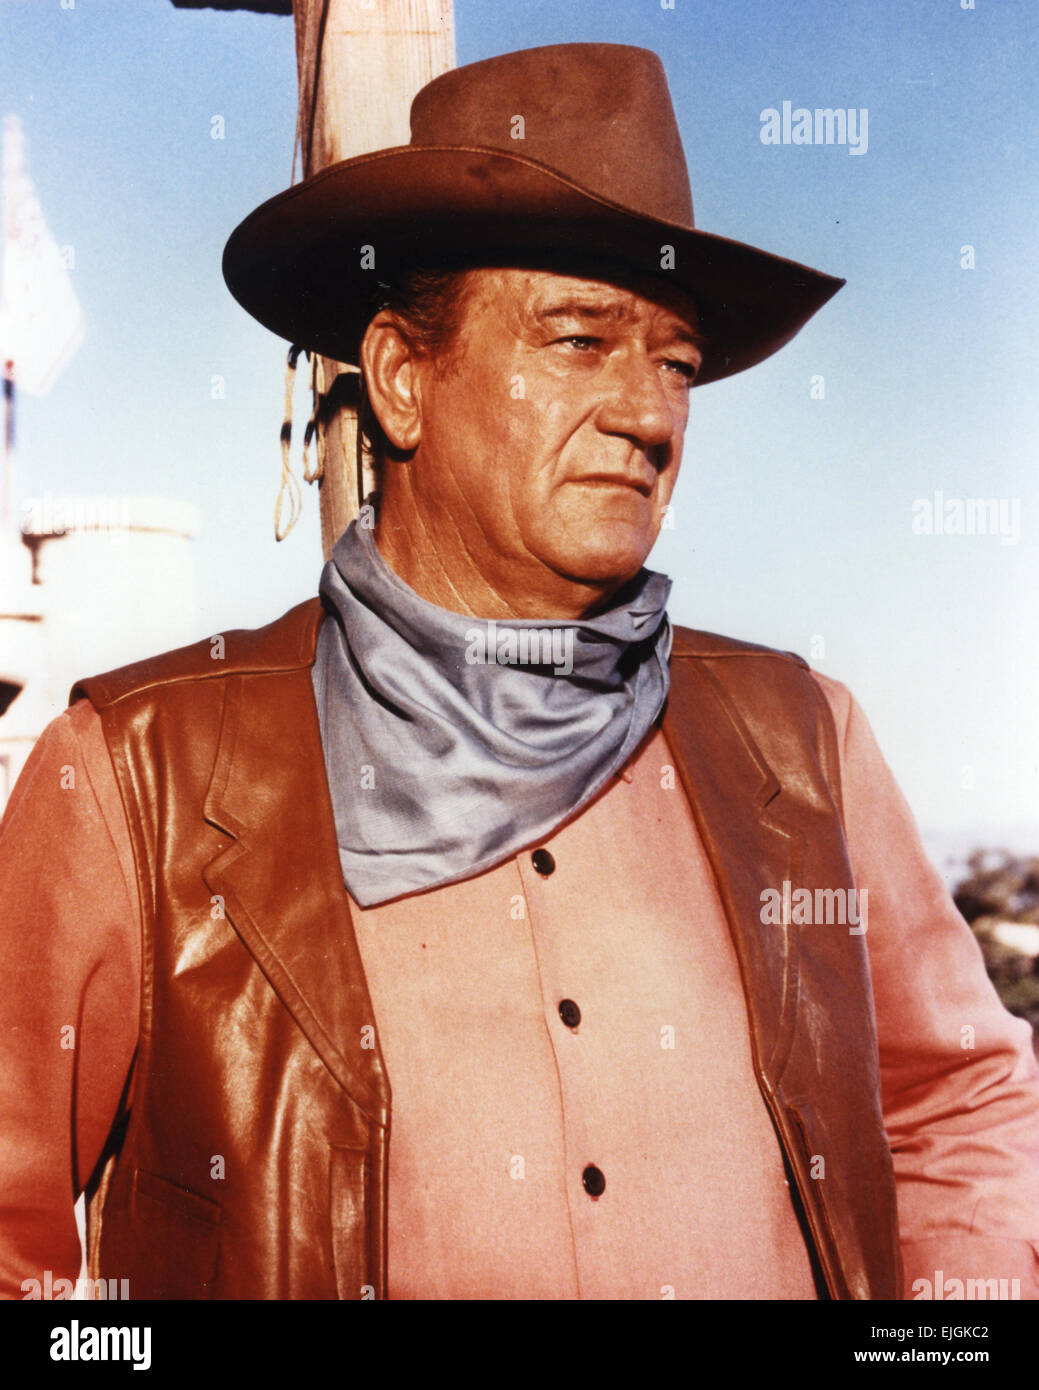 JOHN WAYNE (1907-1979) US film actor famous for his roles in Western films,  about 1966 Stock Photo - Alamy